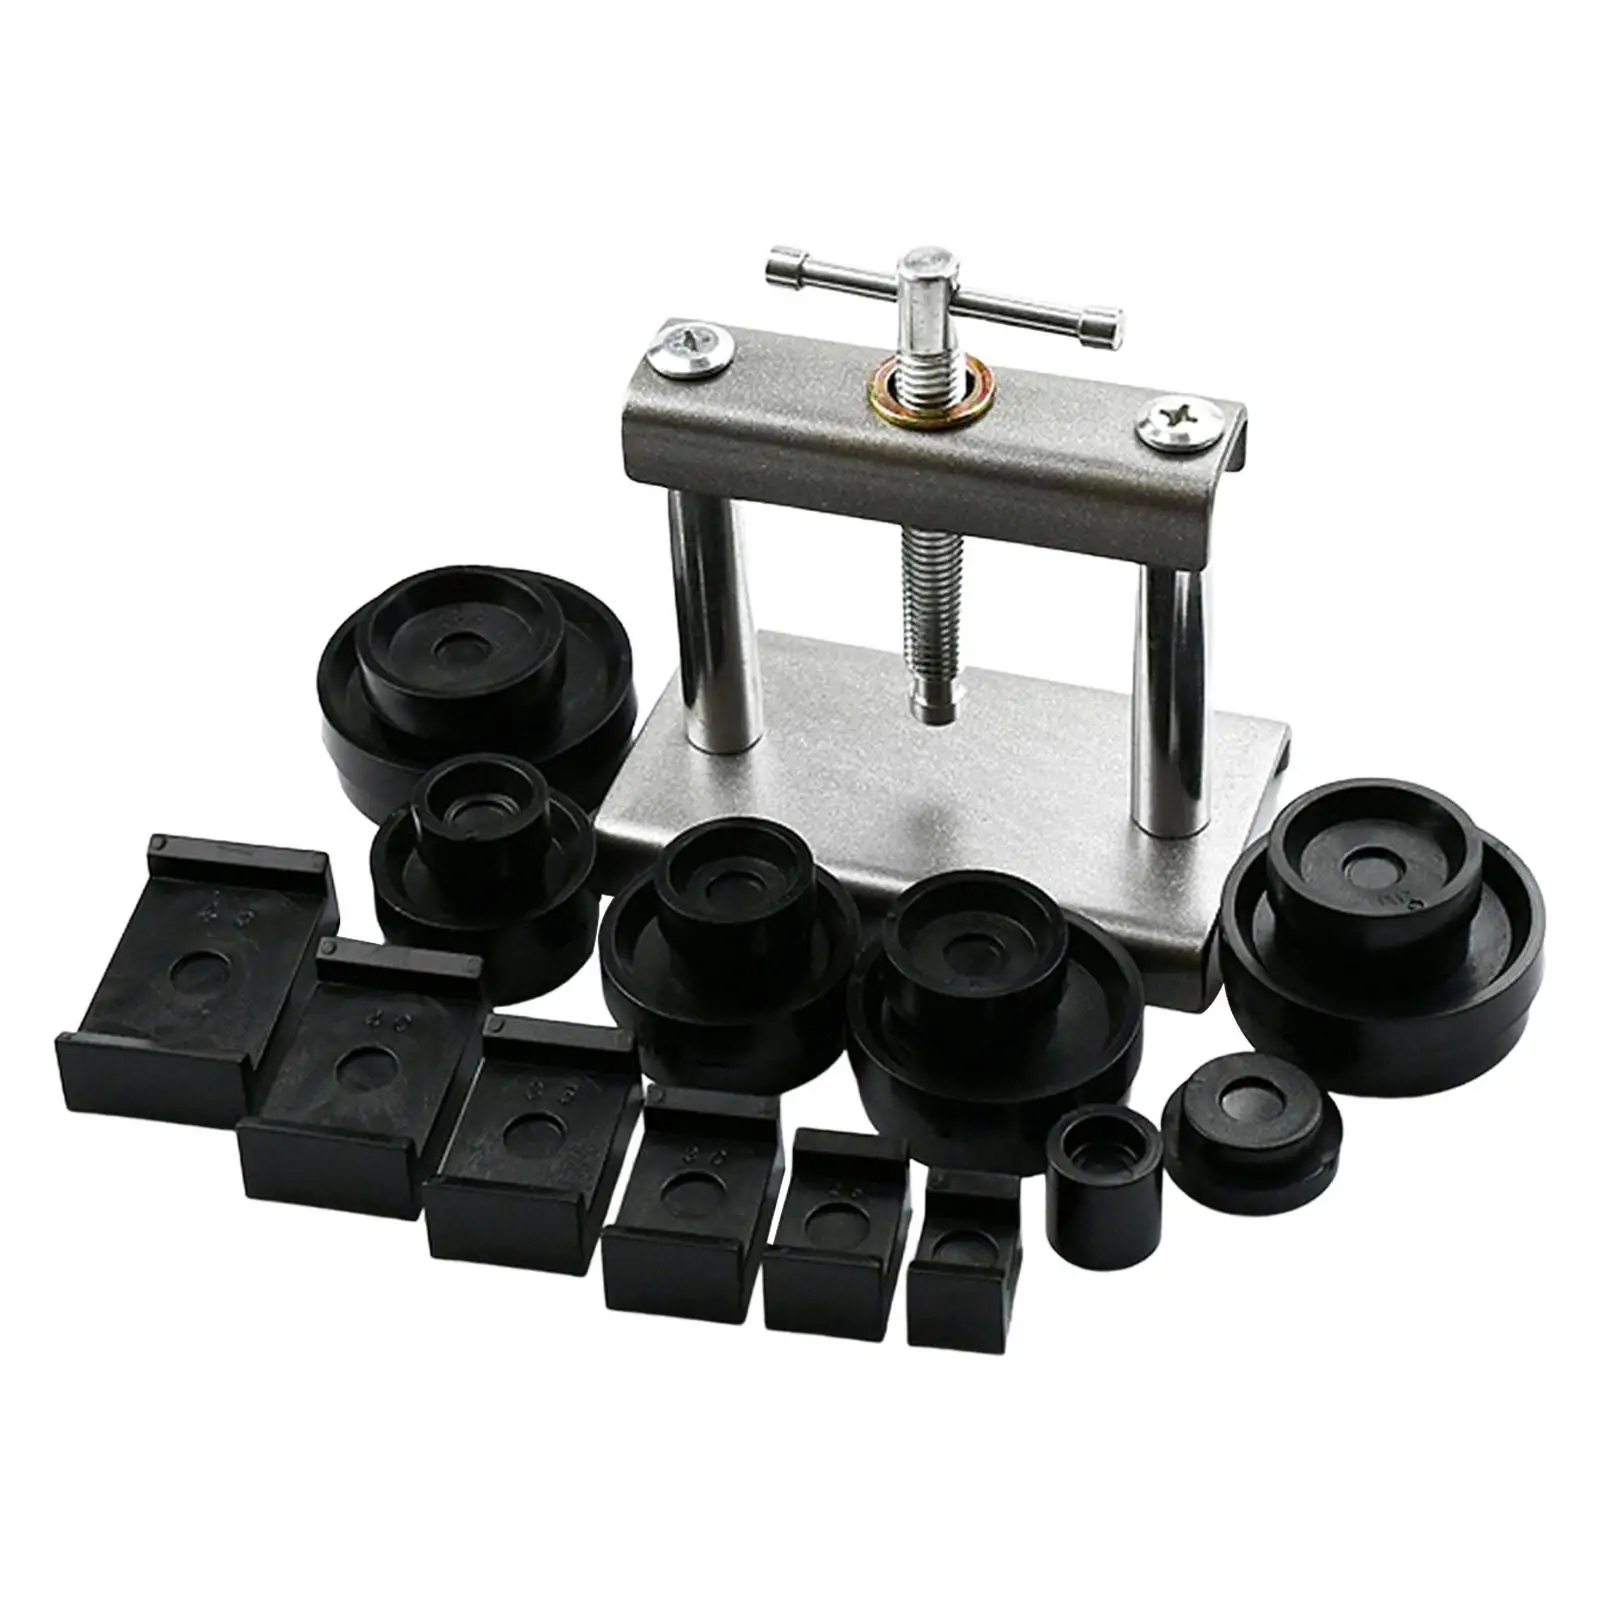 Watch Press Set 13Pcs Fitting Dies Watch press Repair tool Adjustment Tool Kit for Various Kinds of Watch